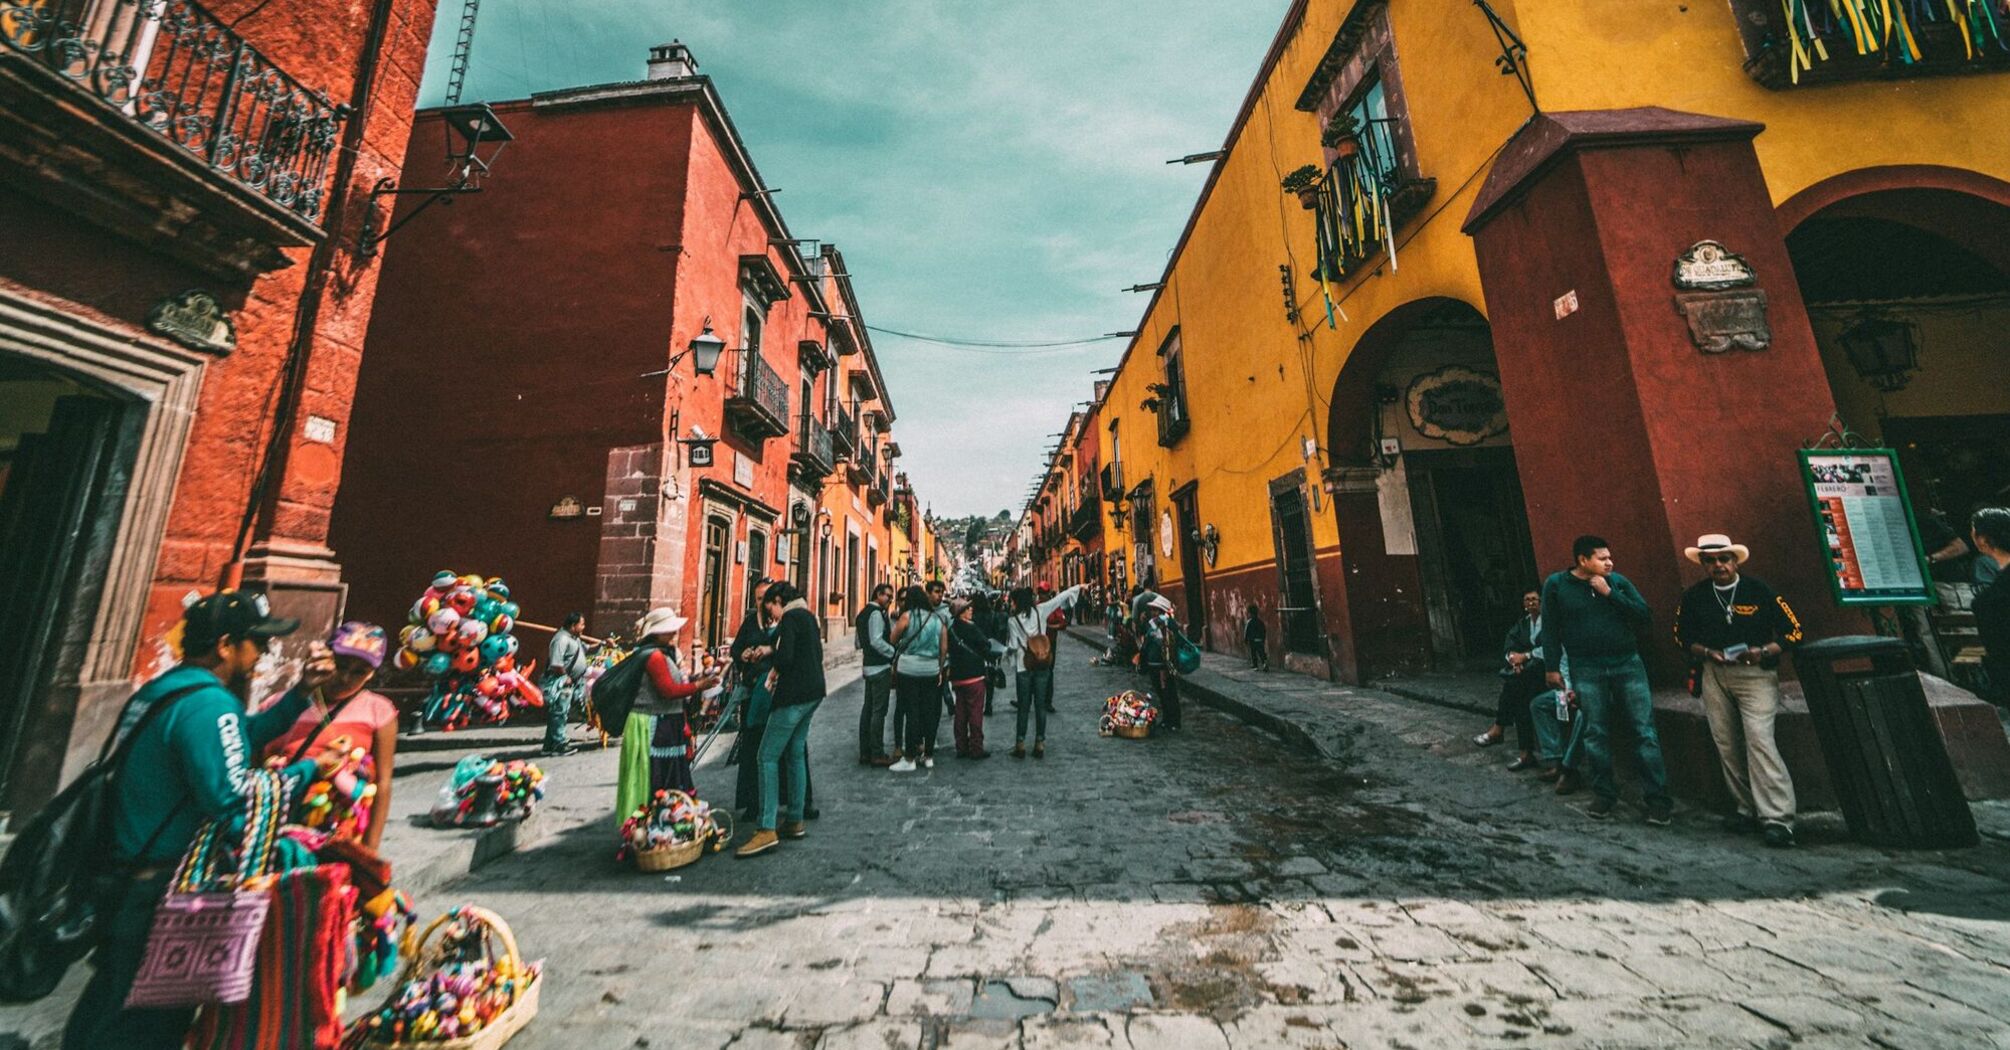 Colorful street scene in San Miguel de Allende, Mexico, with people walking and vendors selling traditional crafts 